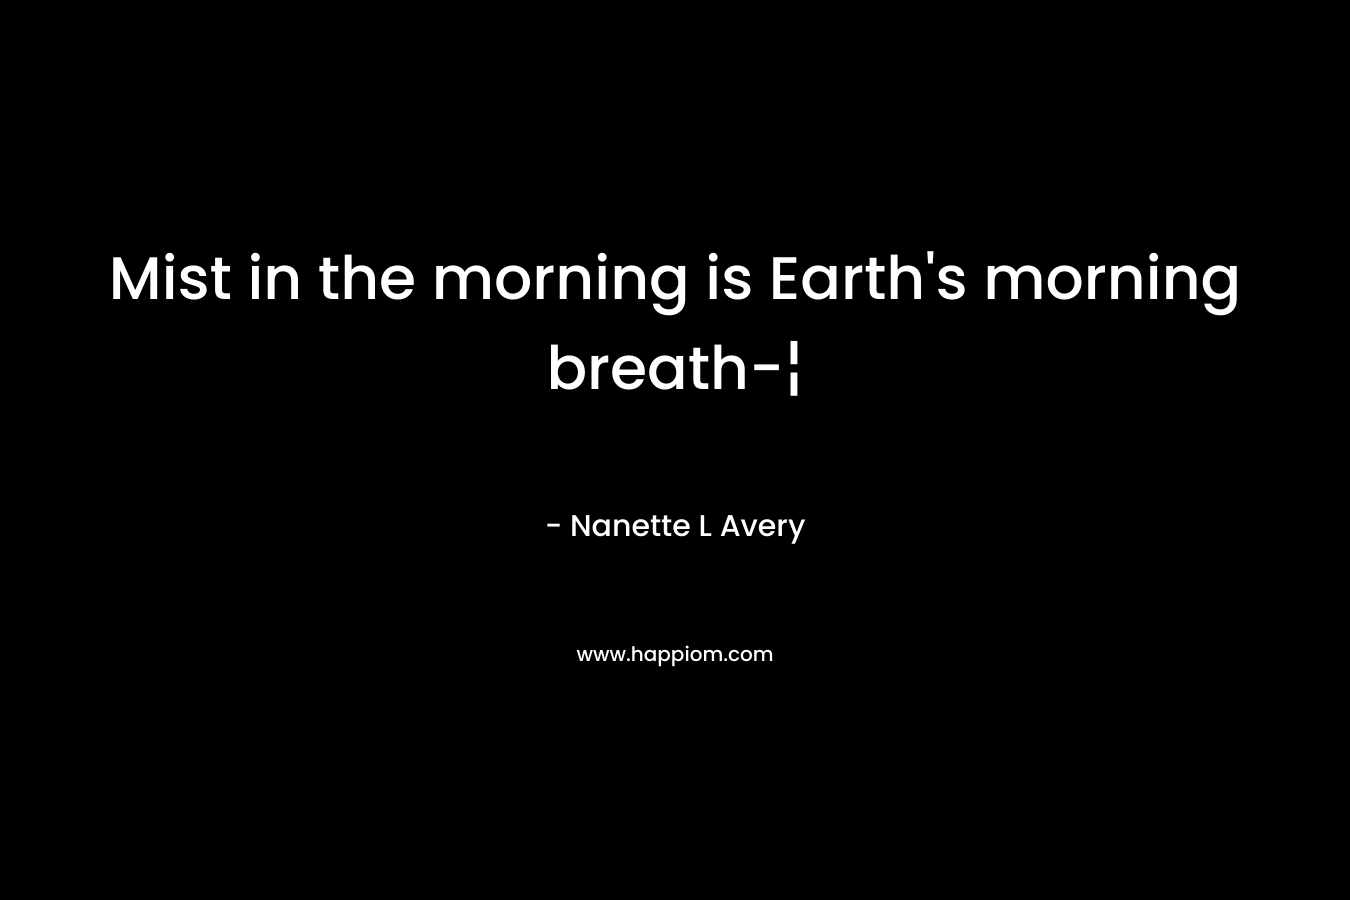 Mist in the morning is Earth’s morning breath-¦ – Nanette L Avery